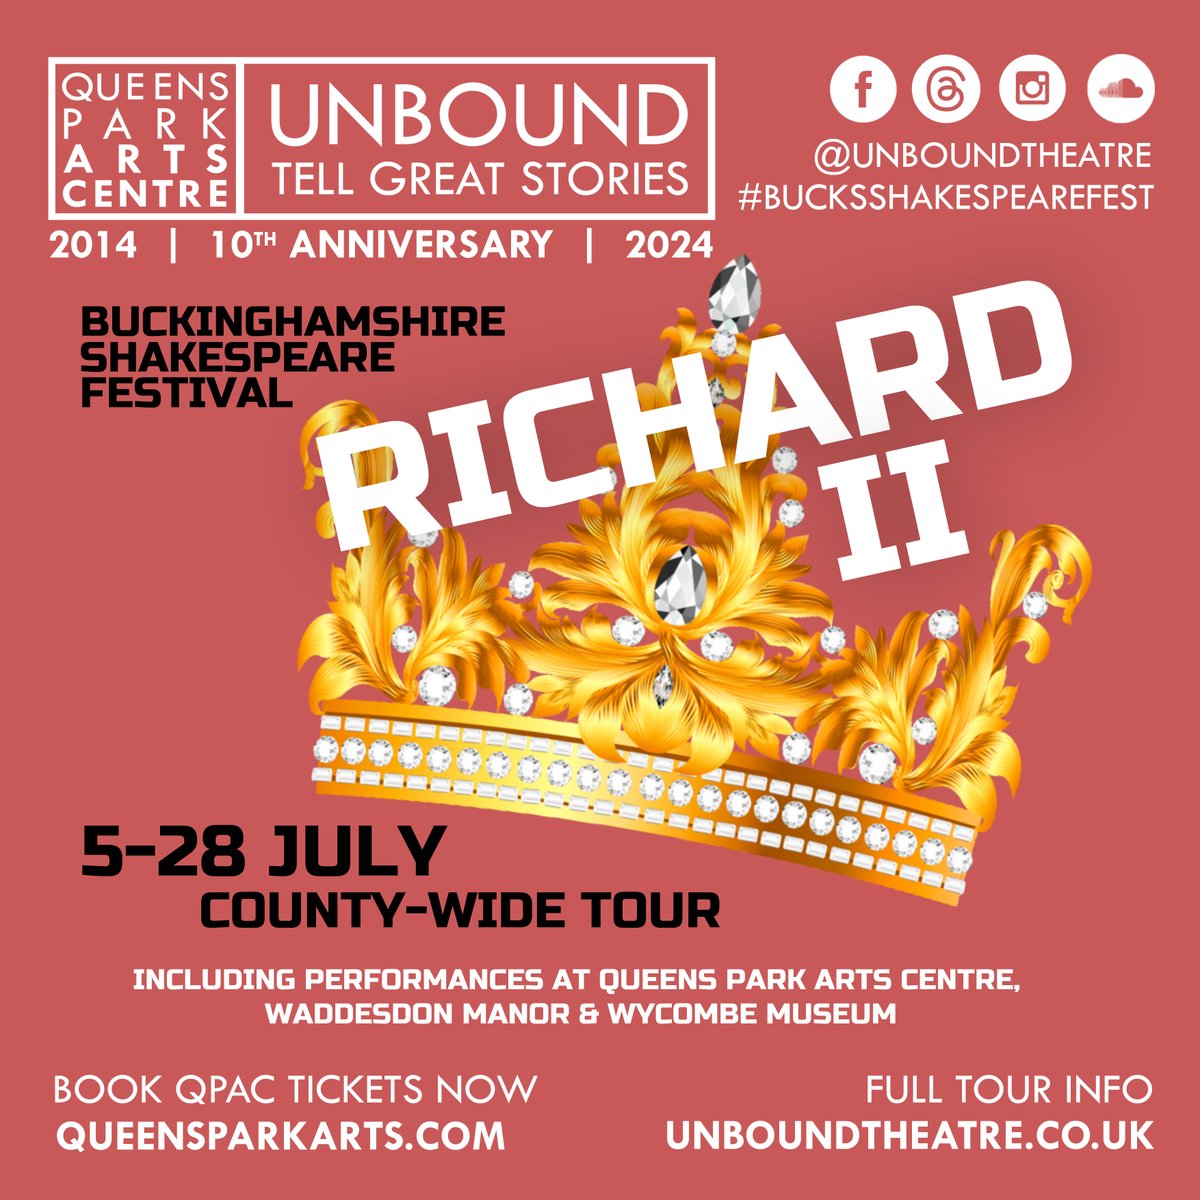 So it turns out that we're opening a play about the politics of leadership the night after a general election. Finger on the pulse, us! 

Tickets for the opening weekend of 'Richard II' here: 
tickets.queensparkarts.com/event/763:255/

#TellGreatStories #BucksShakespeareFest #GeneralElection2024